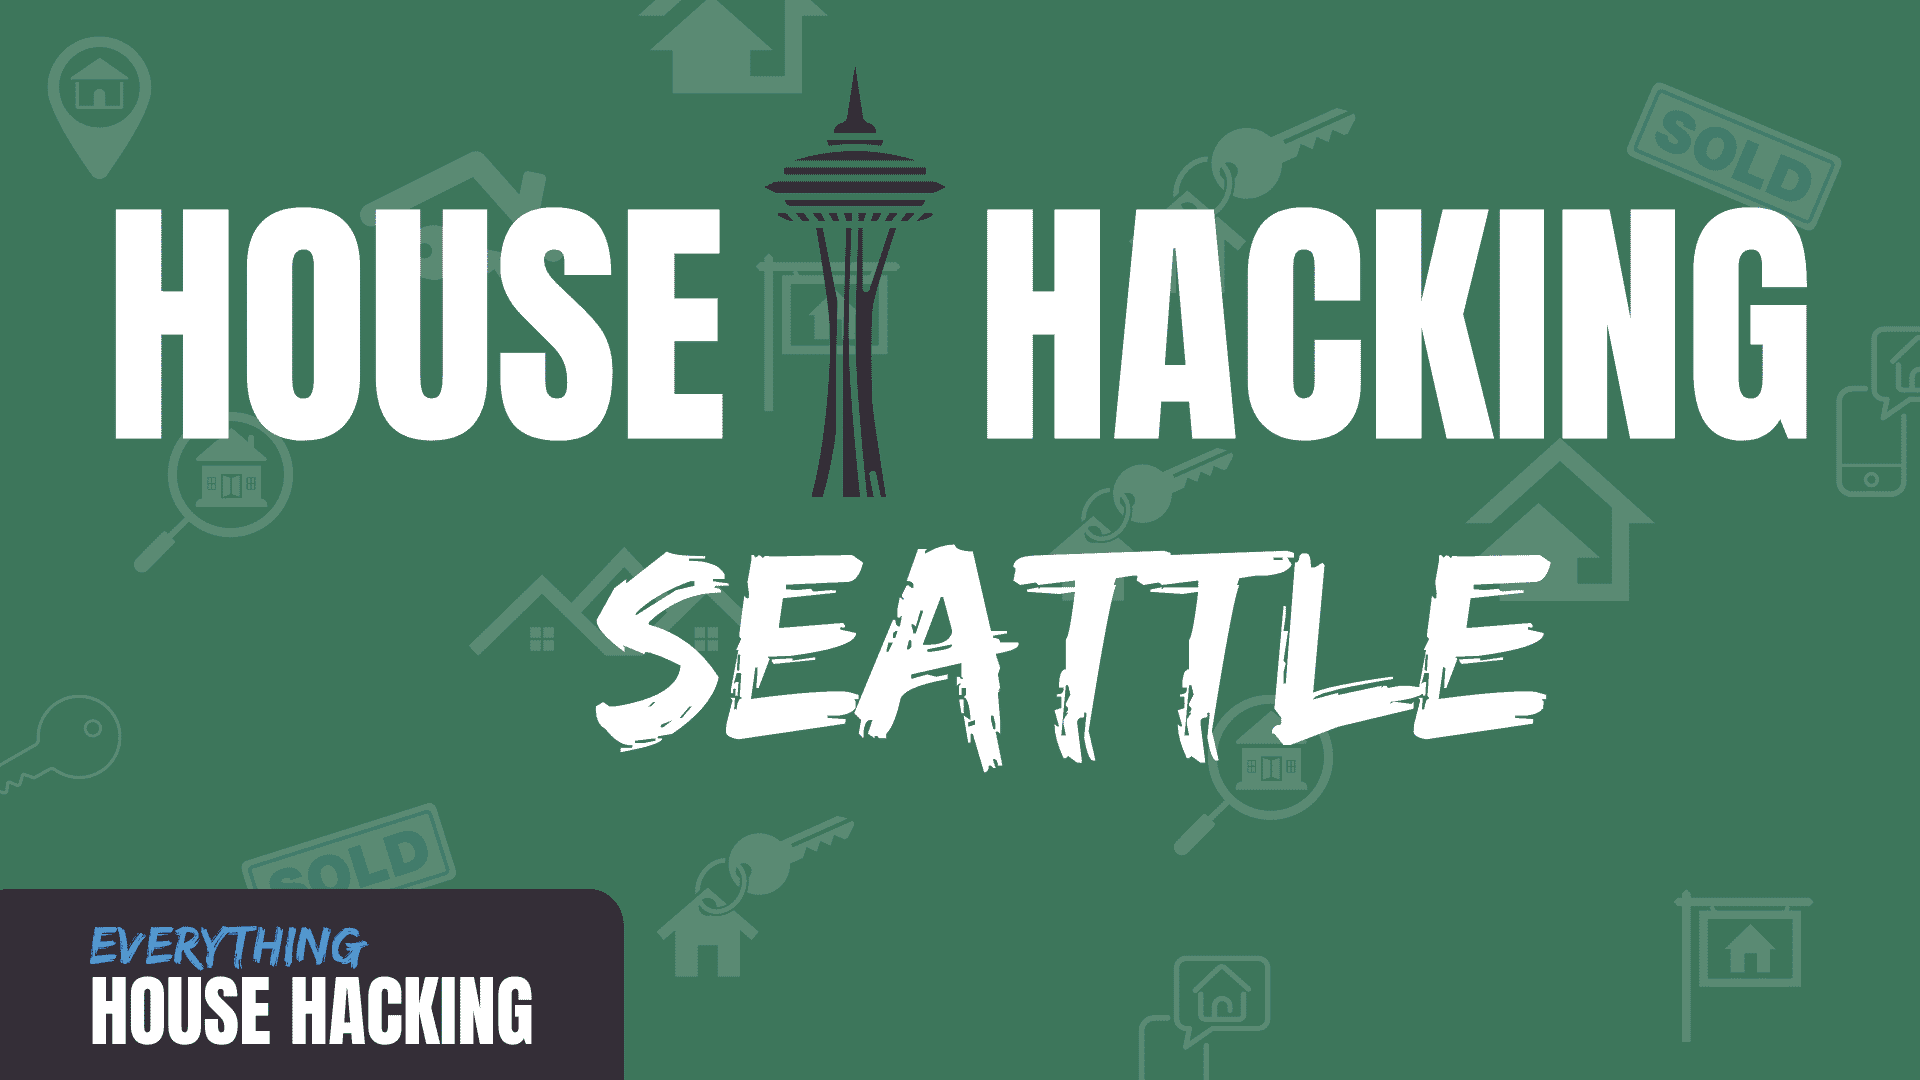 House Hacking Seattle